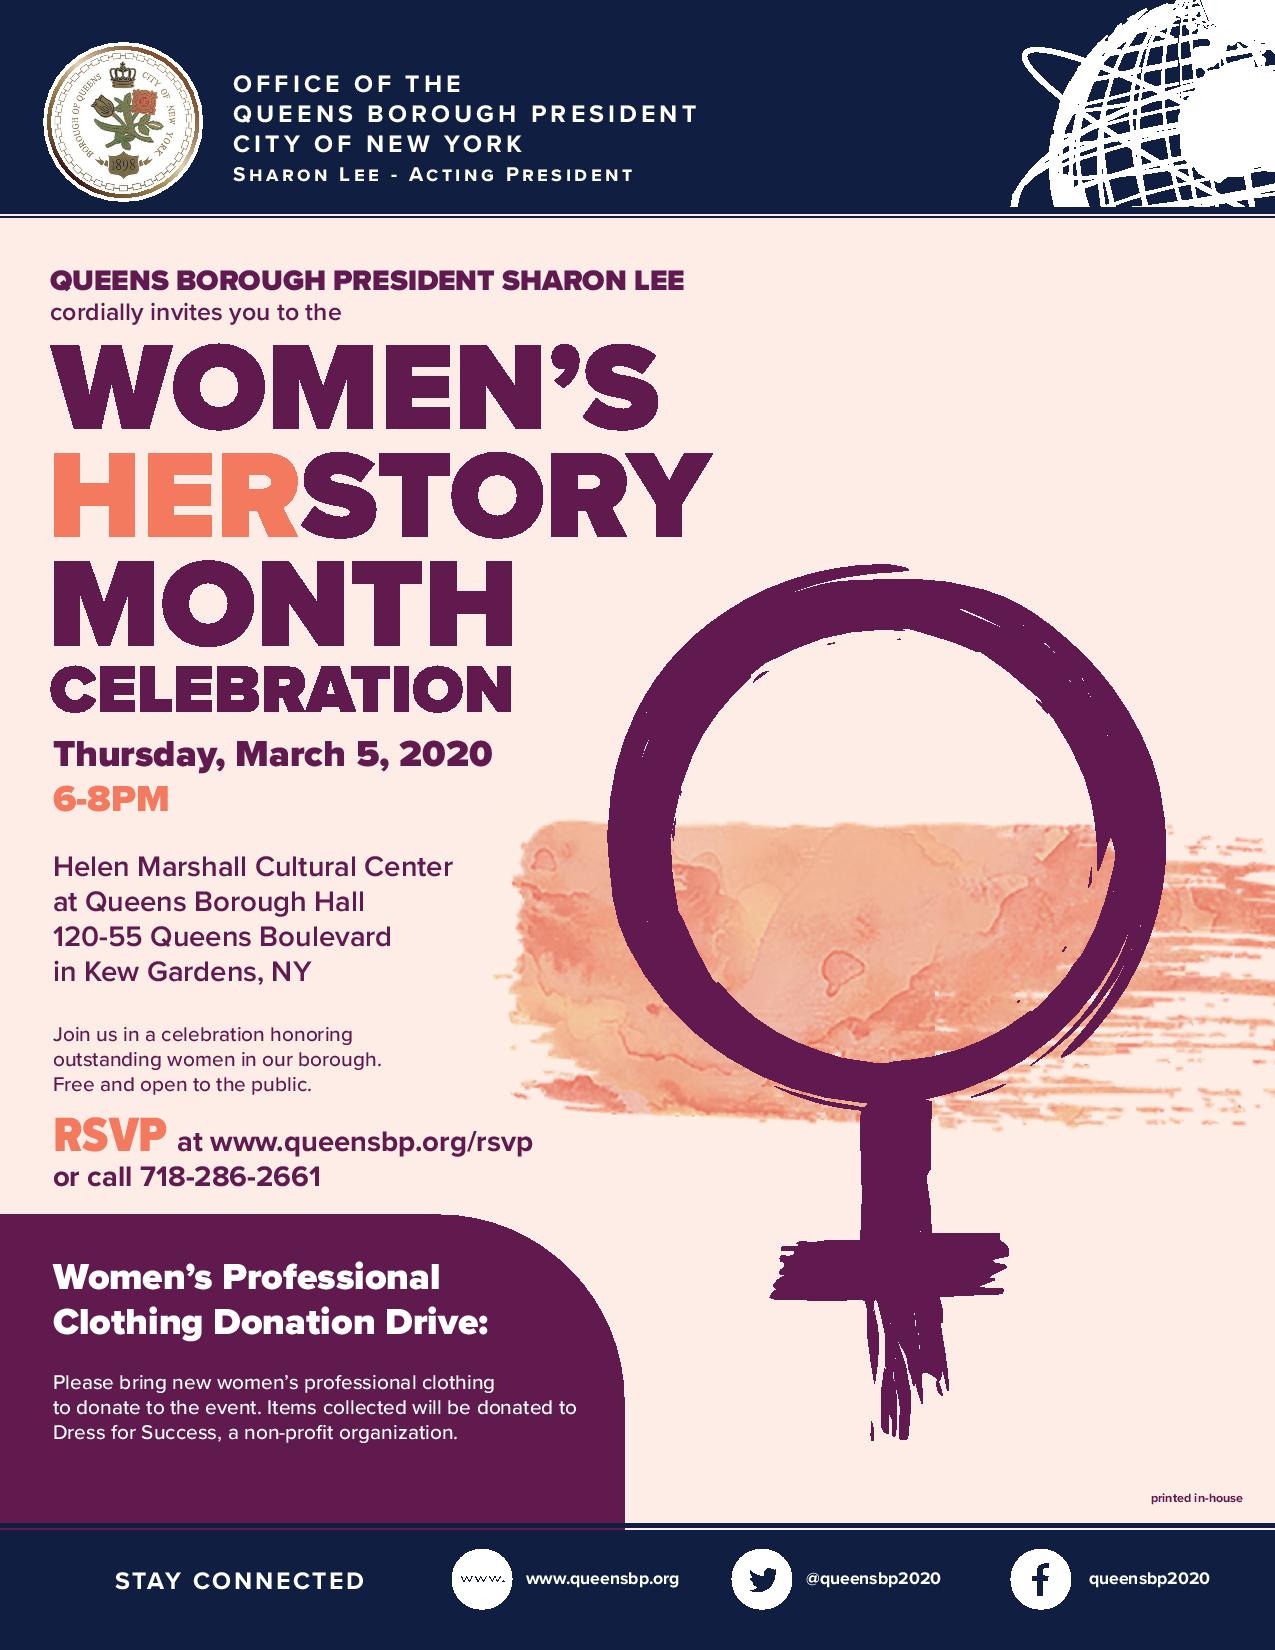 Women's HERstory Month Celebration @ Helen Marshall Cultural Center at Queens Borough Hall